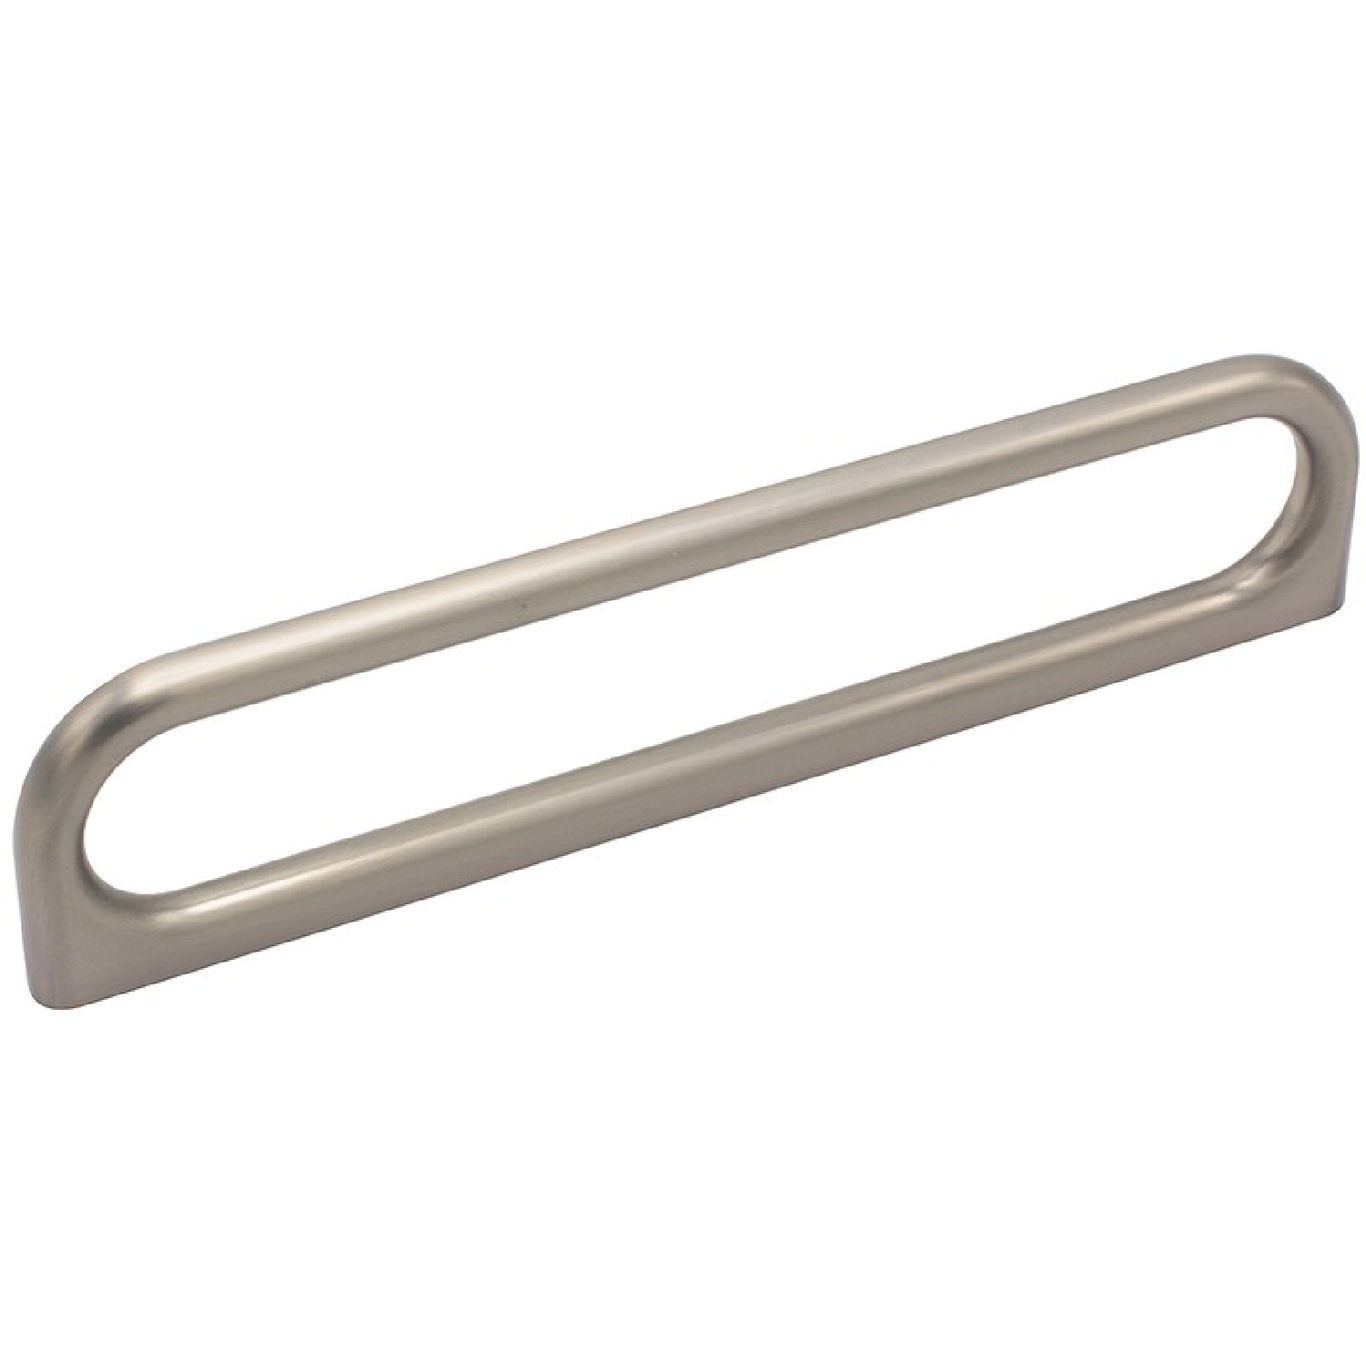 Handle Luck 160, Stainless Steel